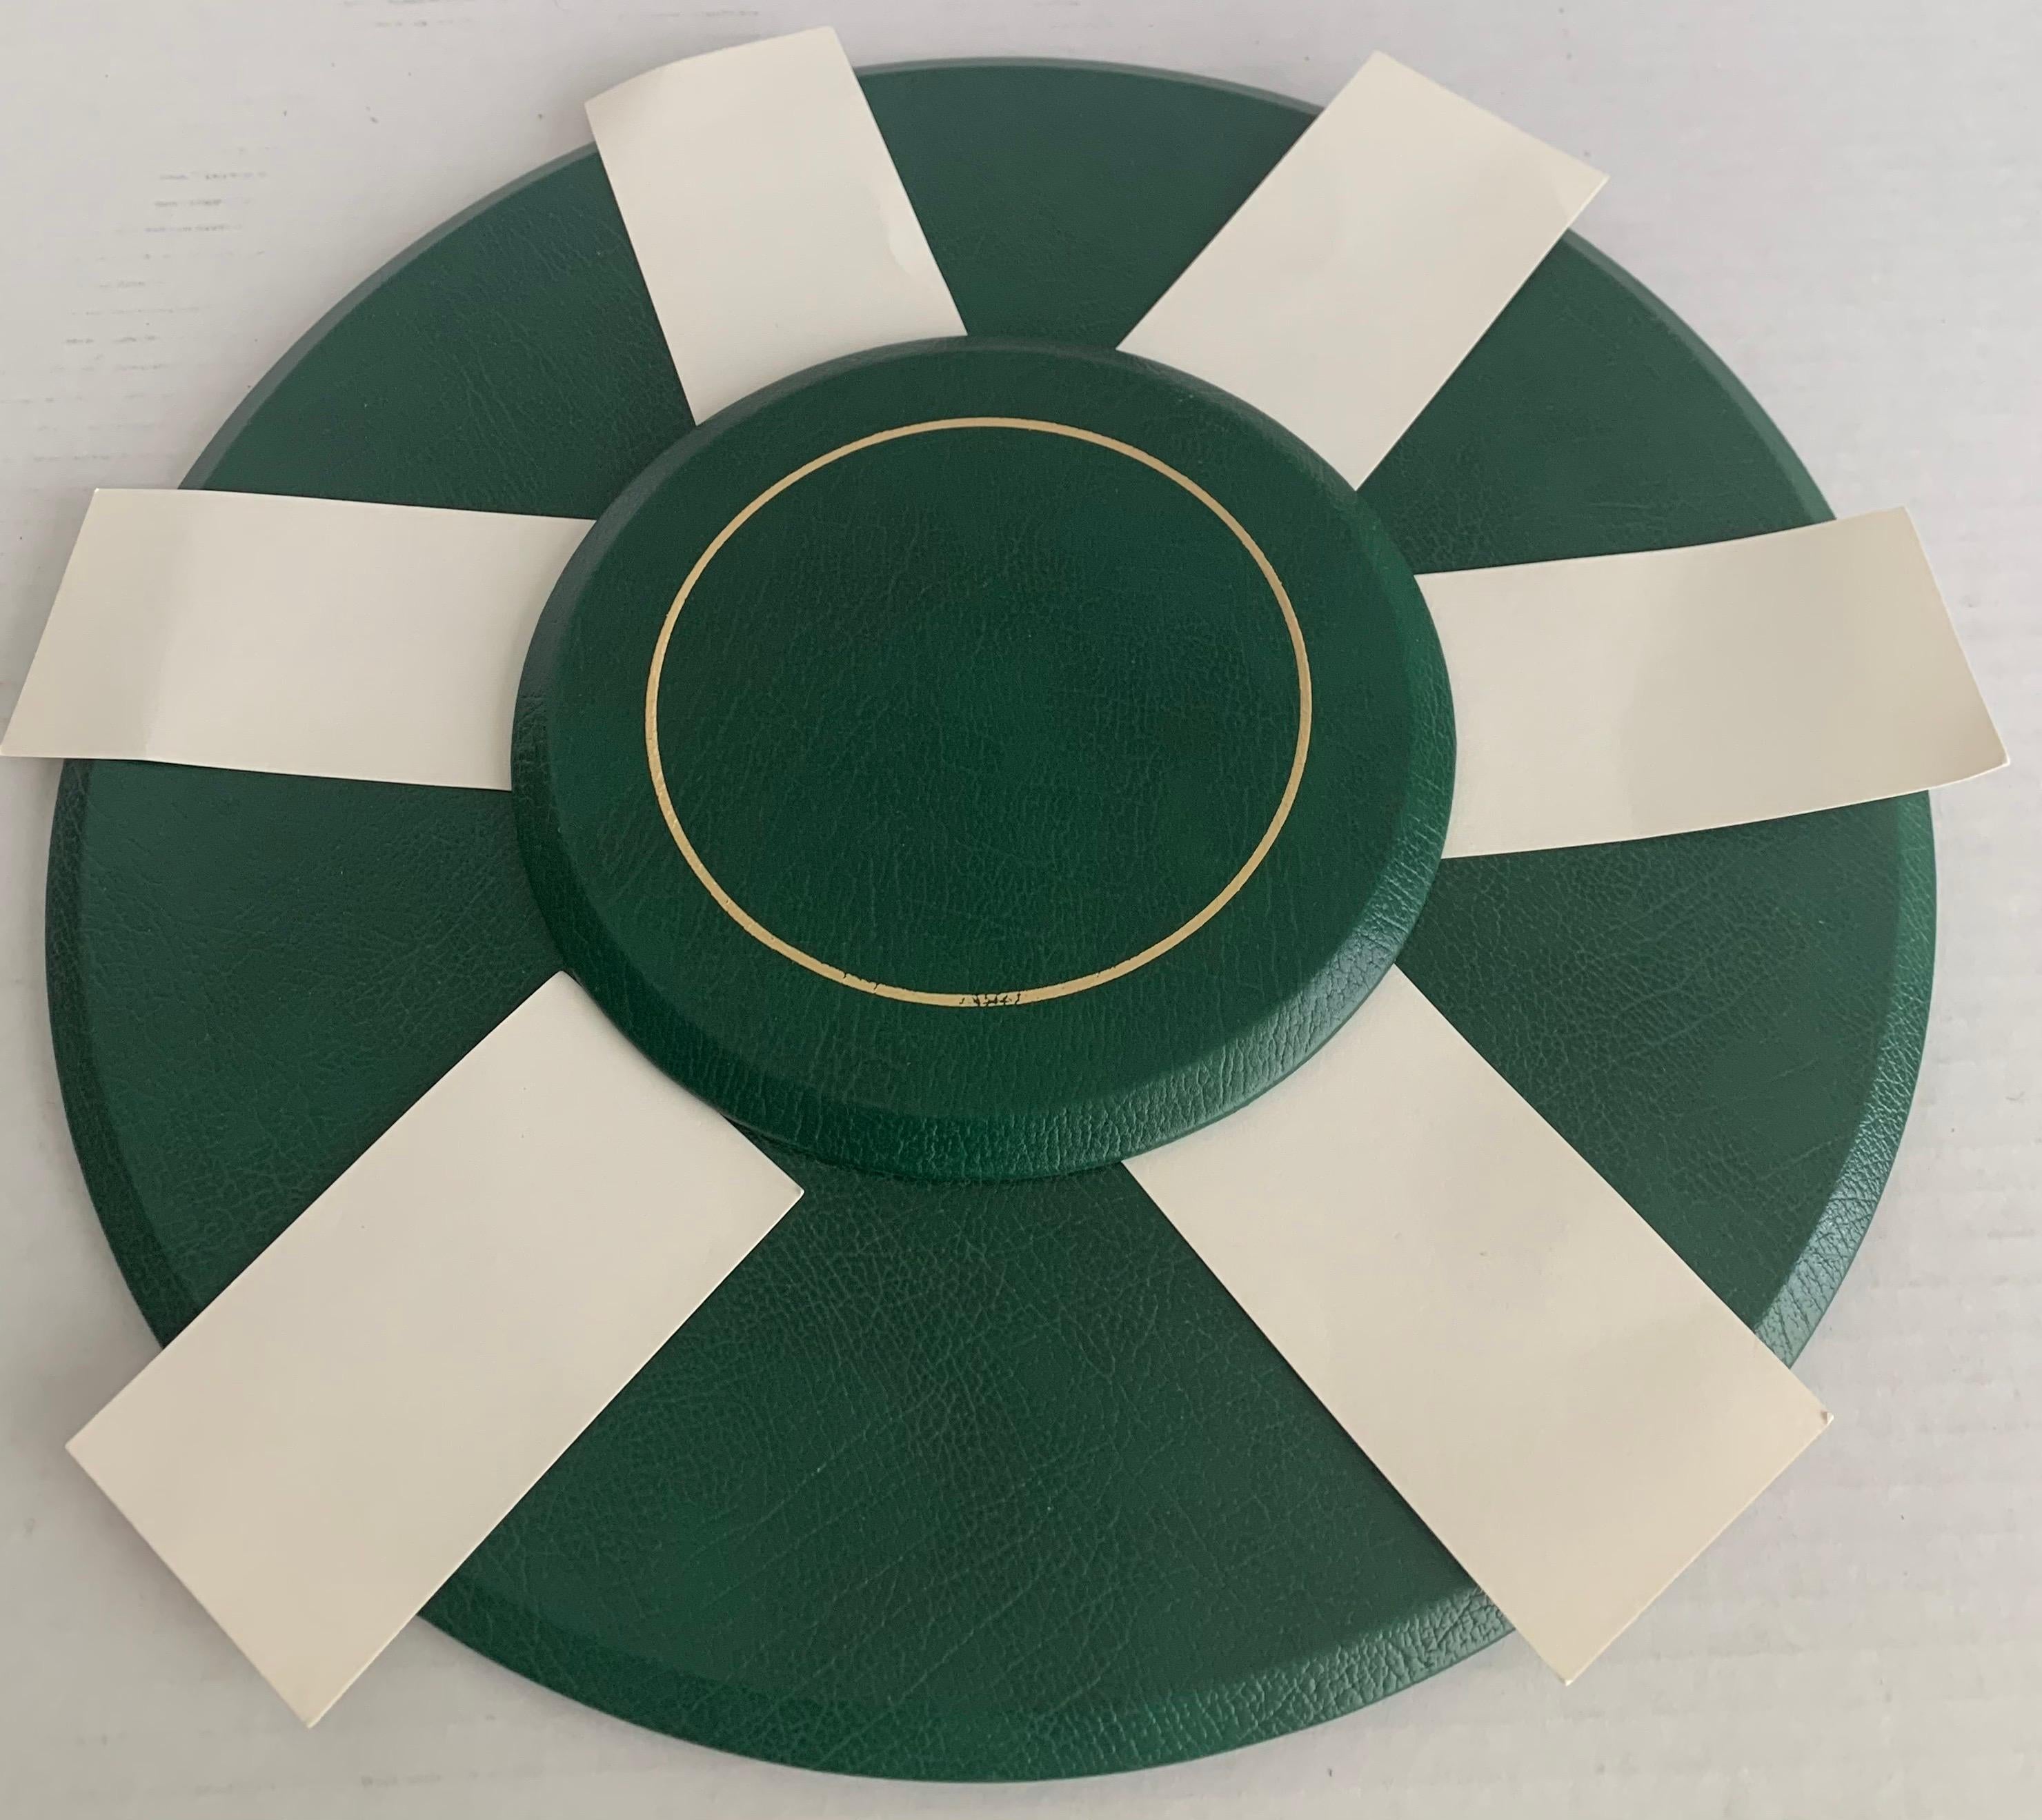 Smythson of Bond Street green leather round table seating chart. Classic racing green leather with gold embossed detailing. Included 6 ecru paper name cards. Underside is black leather stamped Smythson of Bond Street.
Comes with original retailer